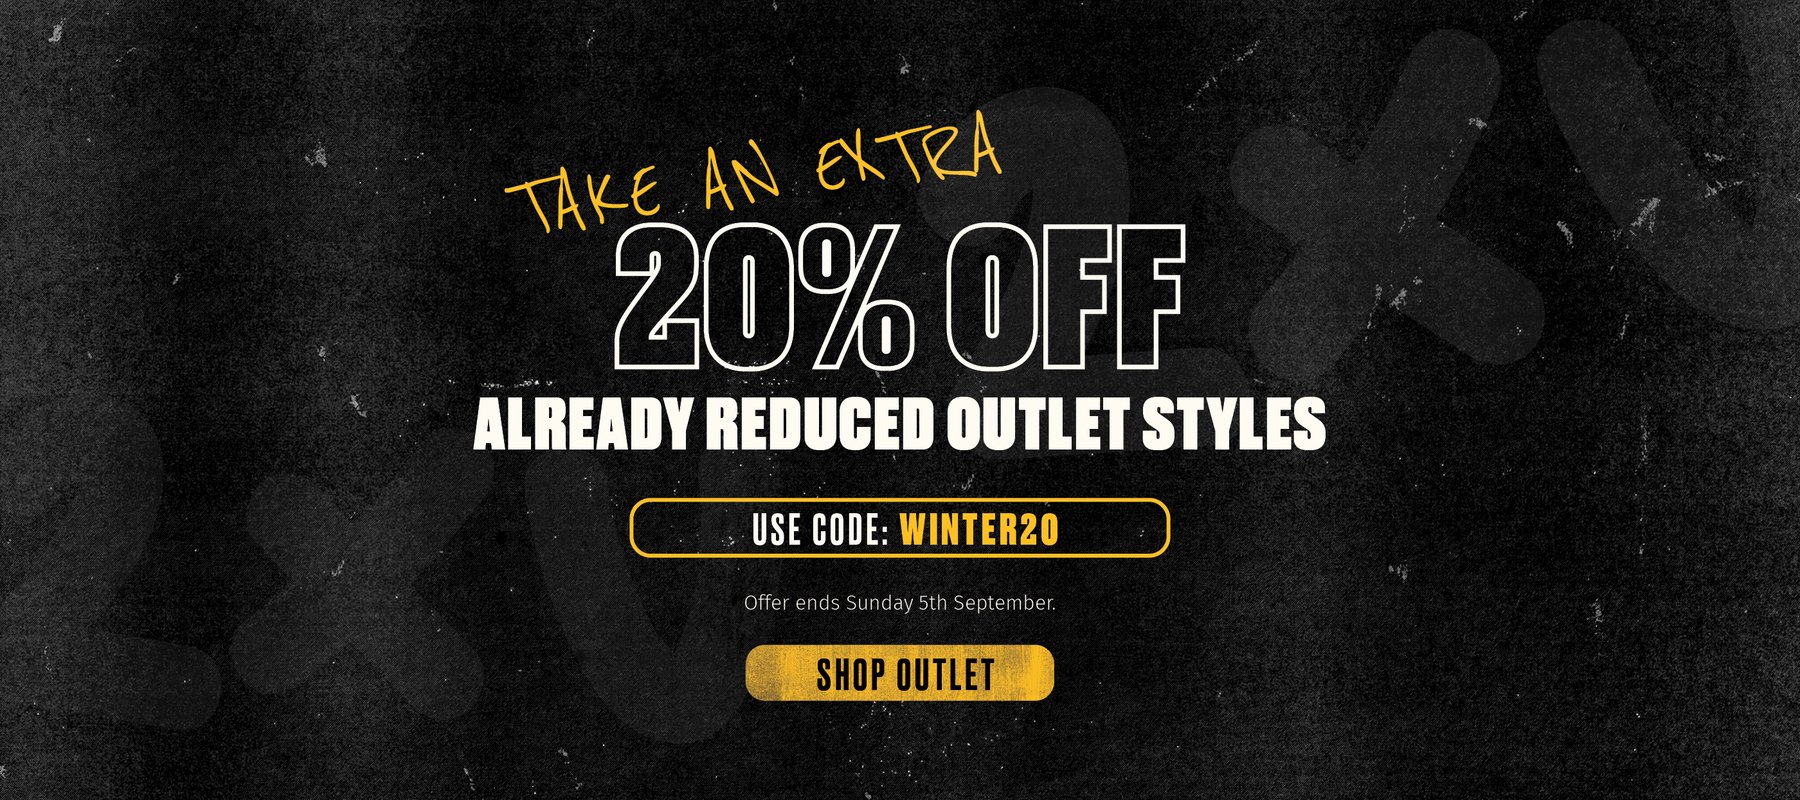 Extra 20% OFF on already reduced outlet styles